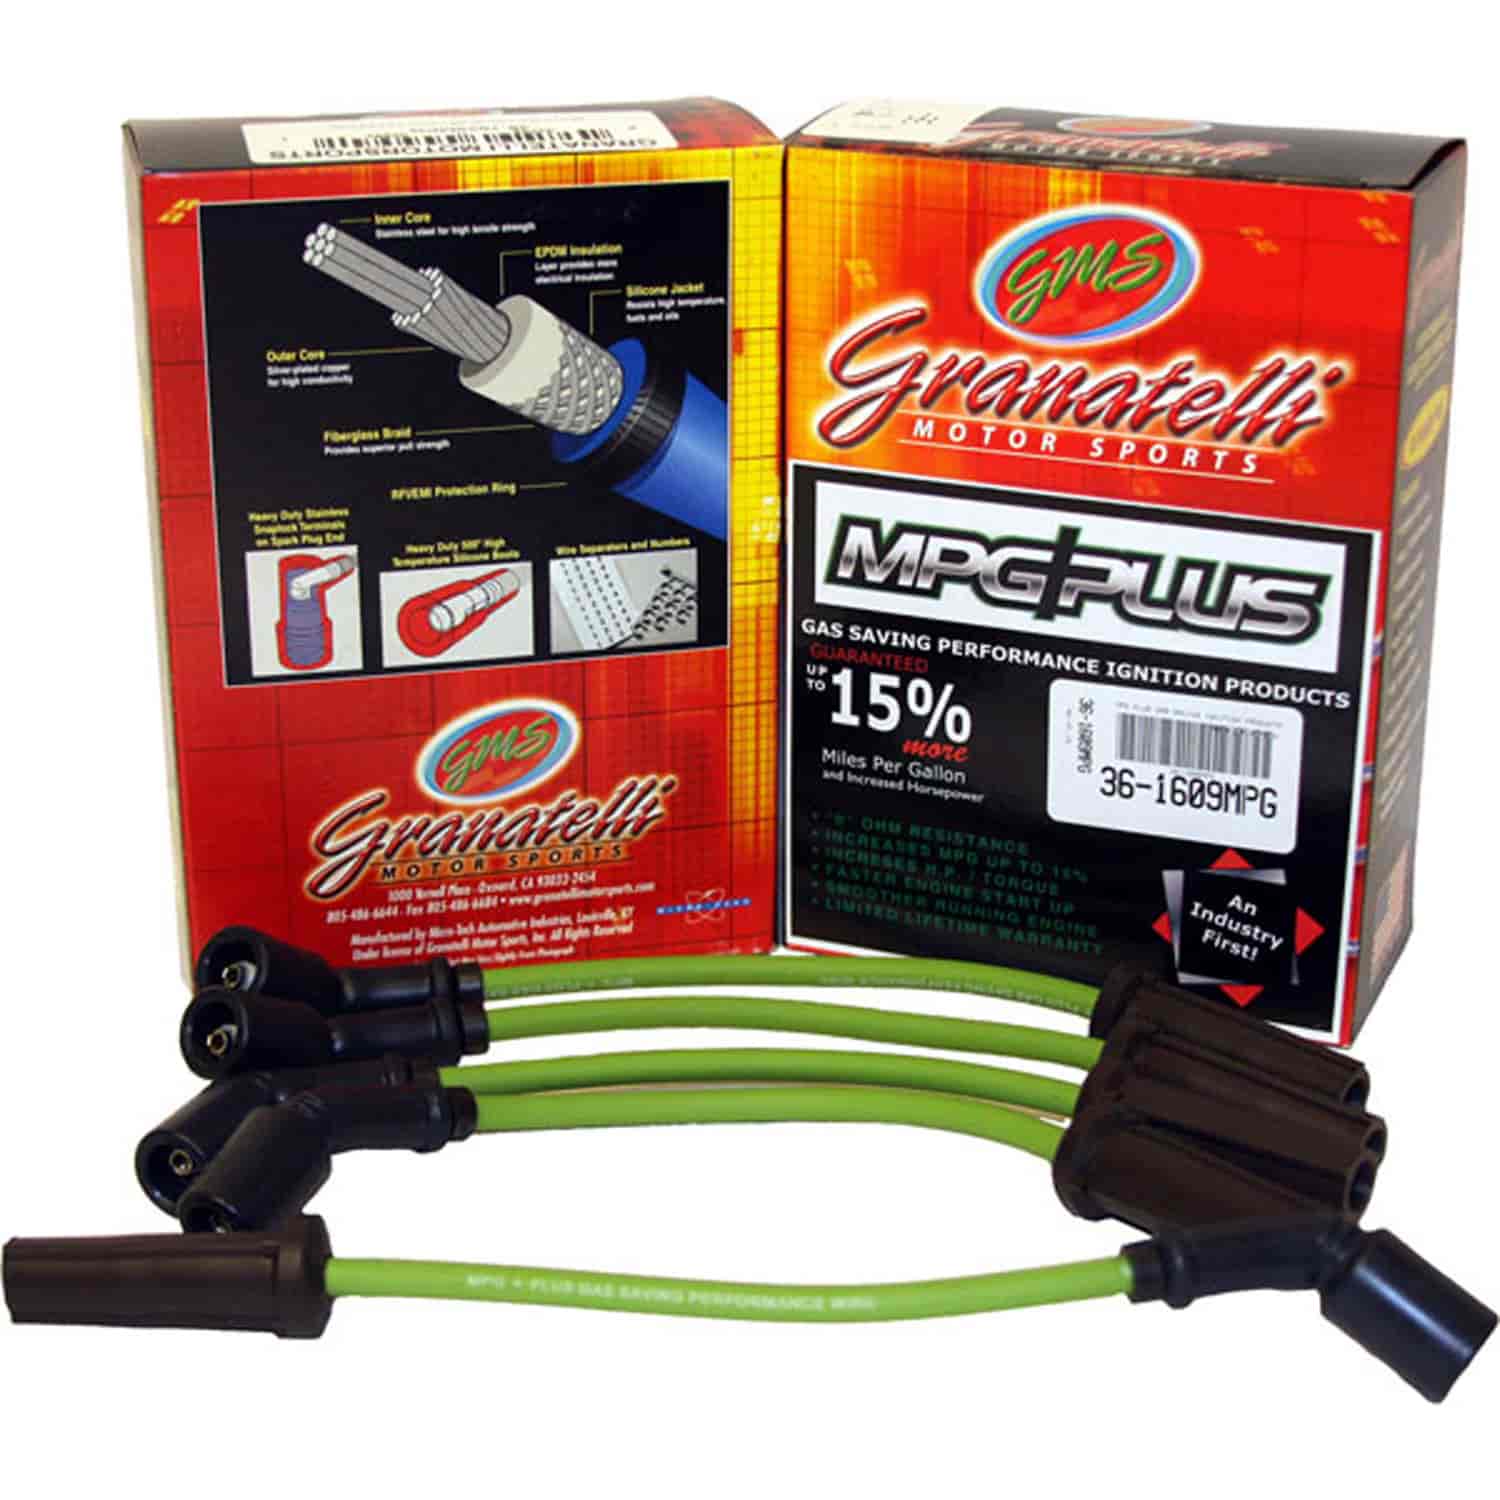 MPG Wires VOLVO 850 SERIES 5CYL 2.3L 94-97